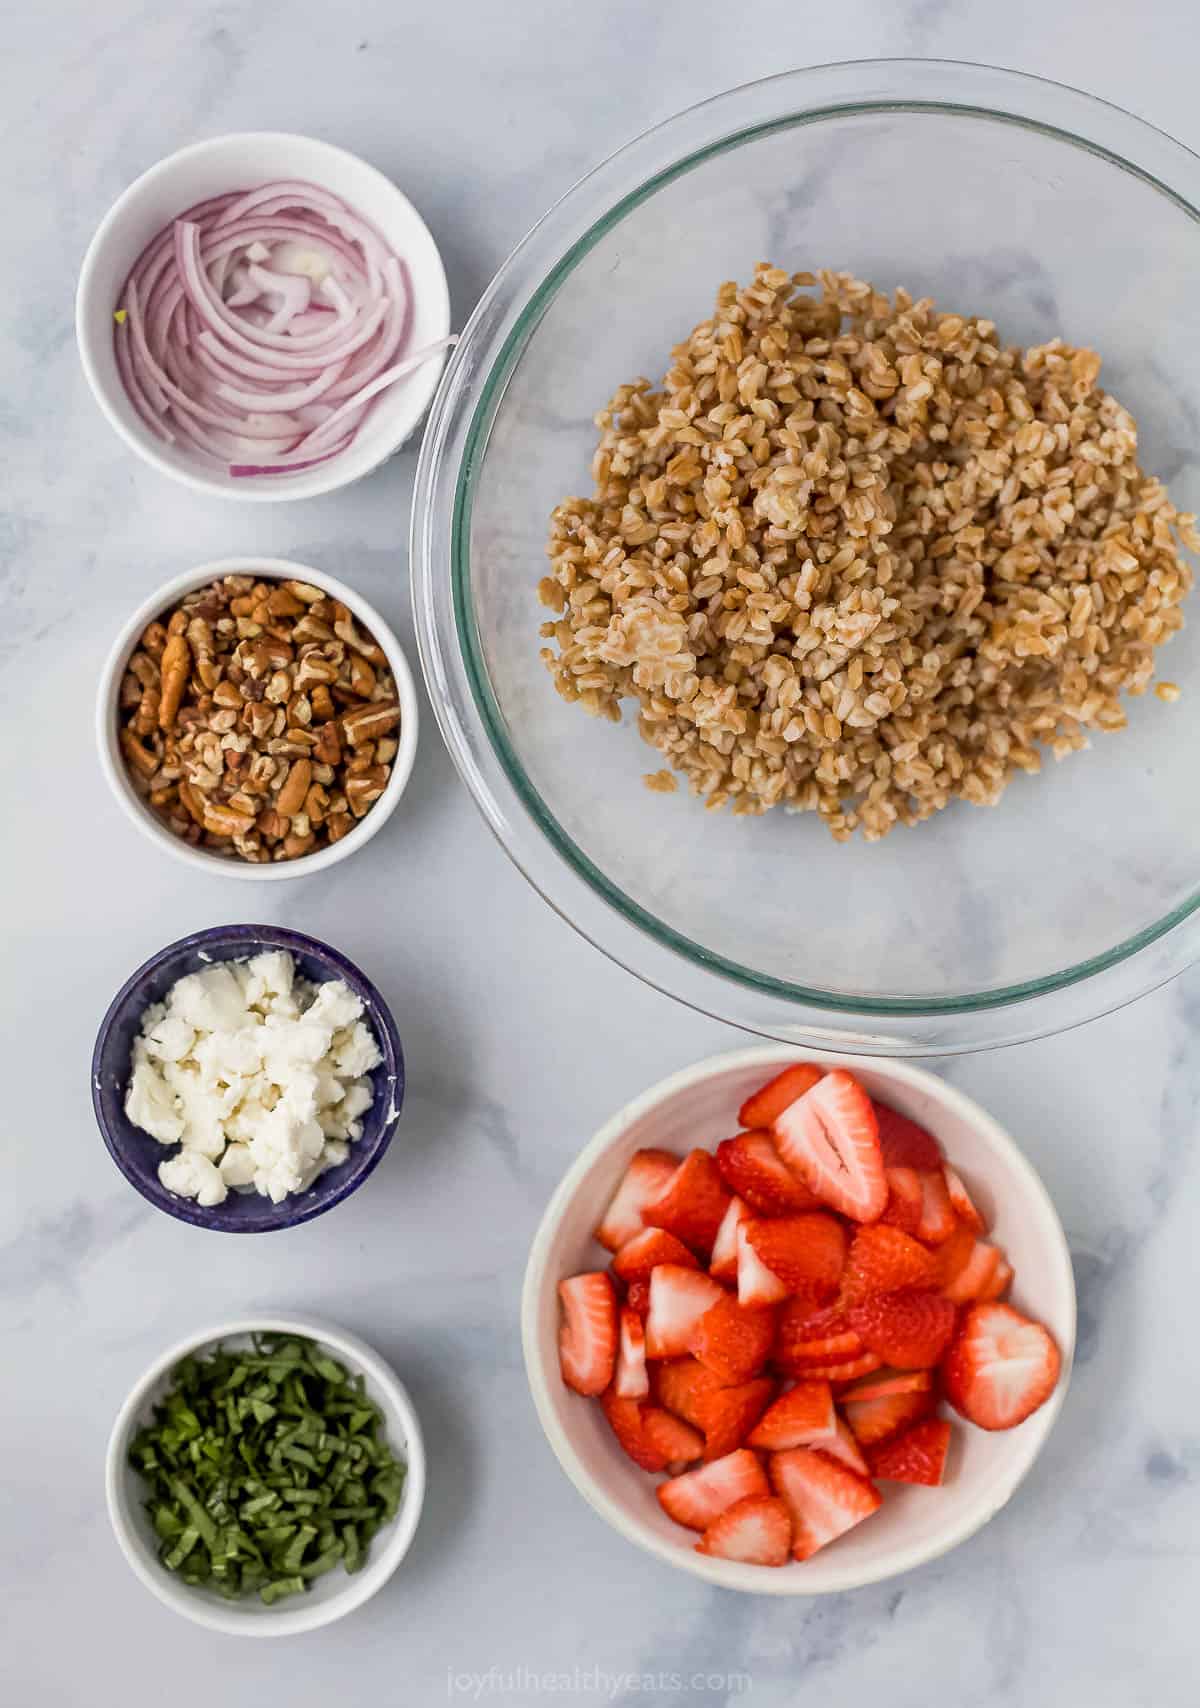 A bowl of chopped pecans, a bowl of crumbled goat cheese and the rest of the ingredients in separate bowls on a countertop